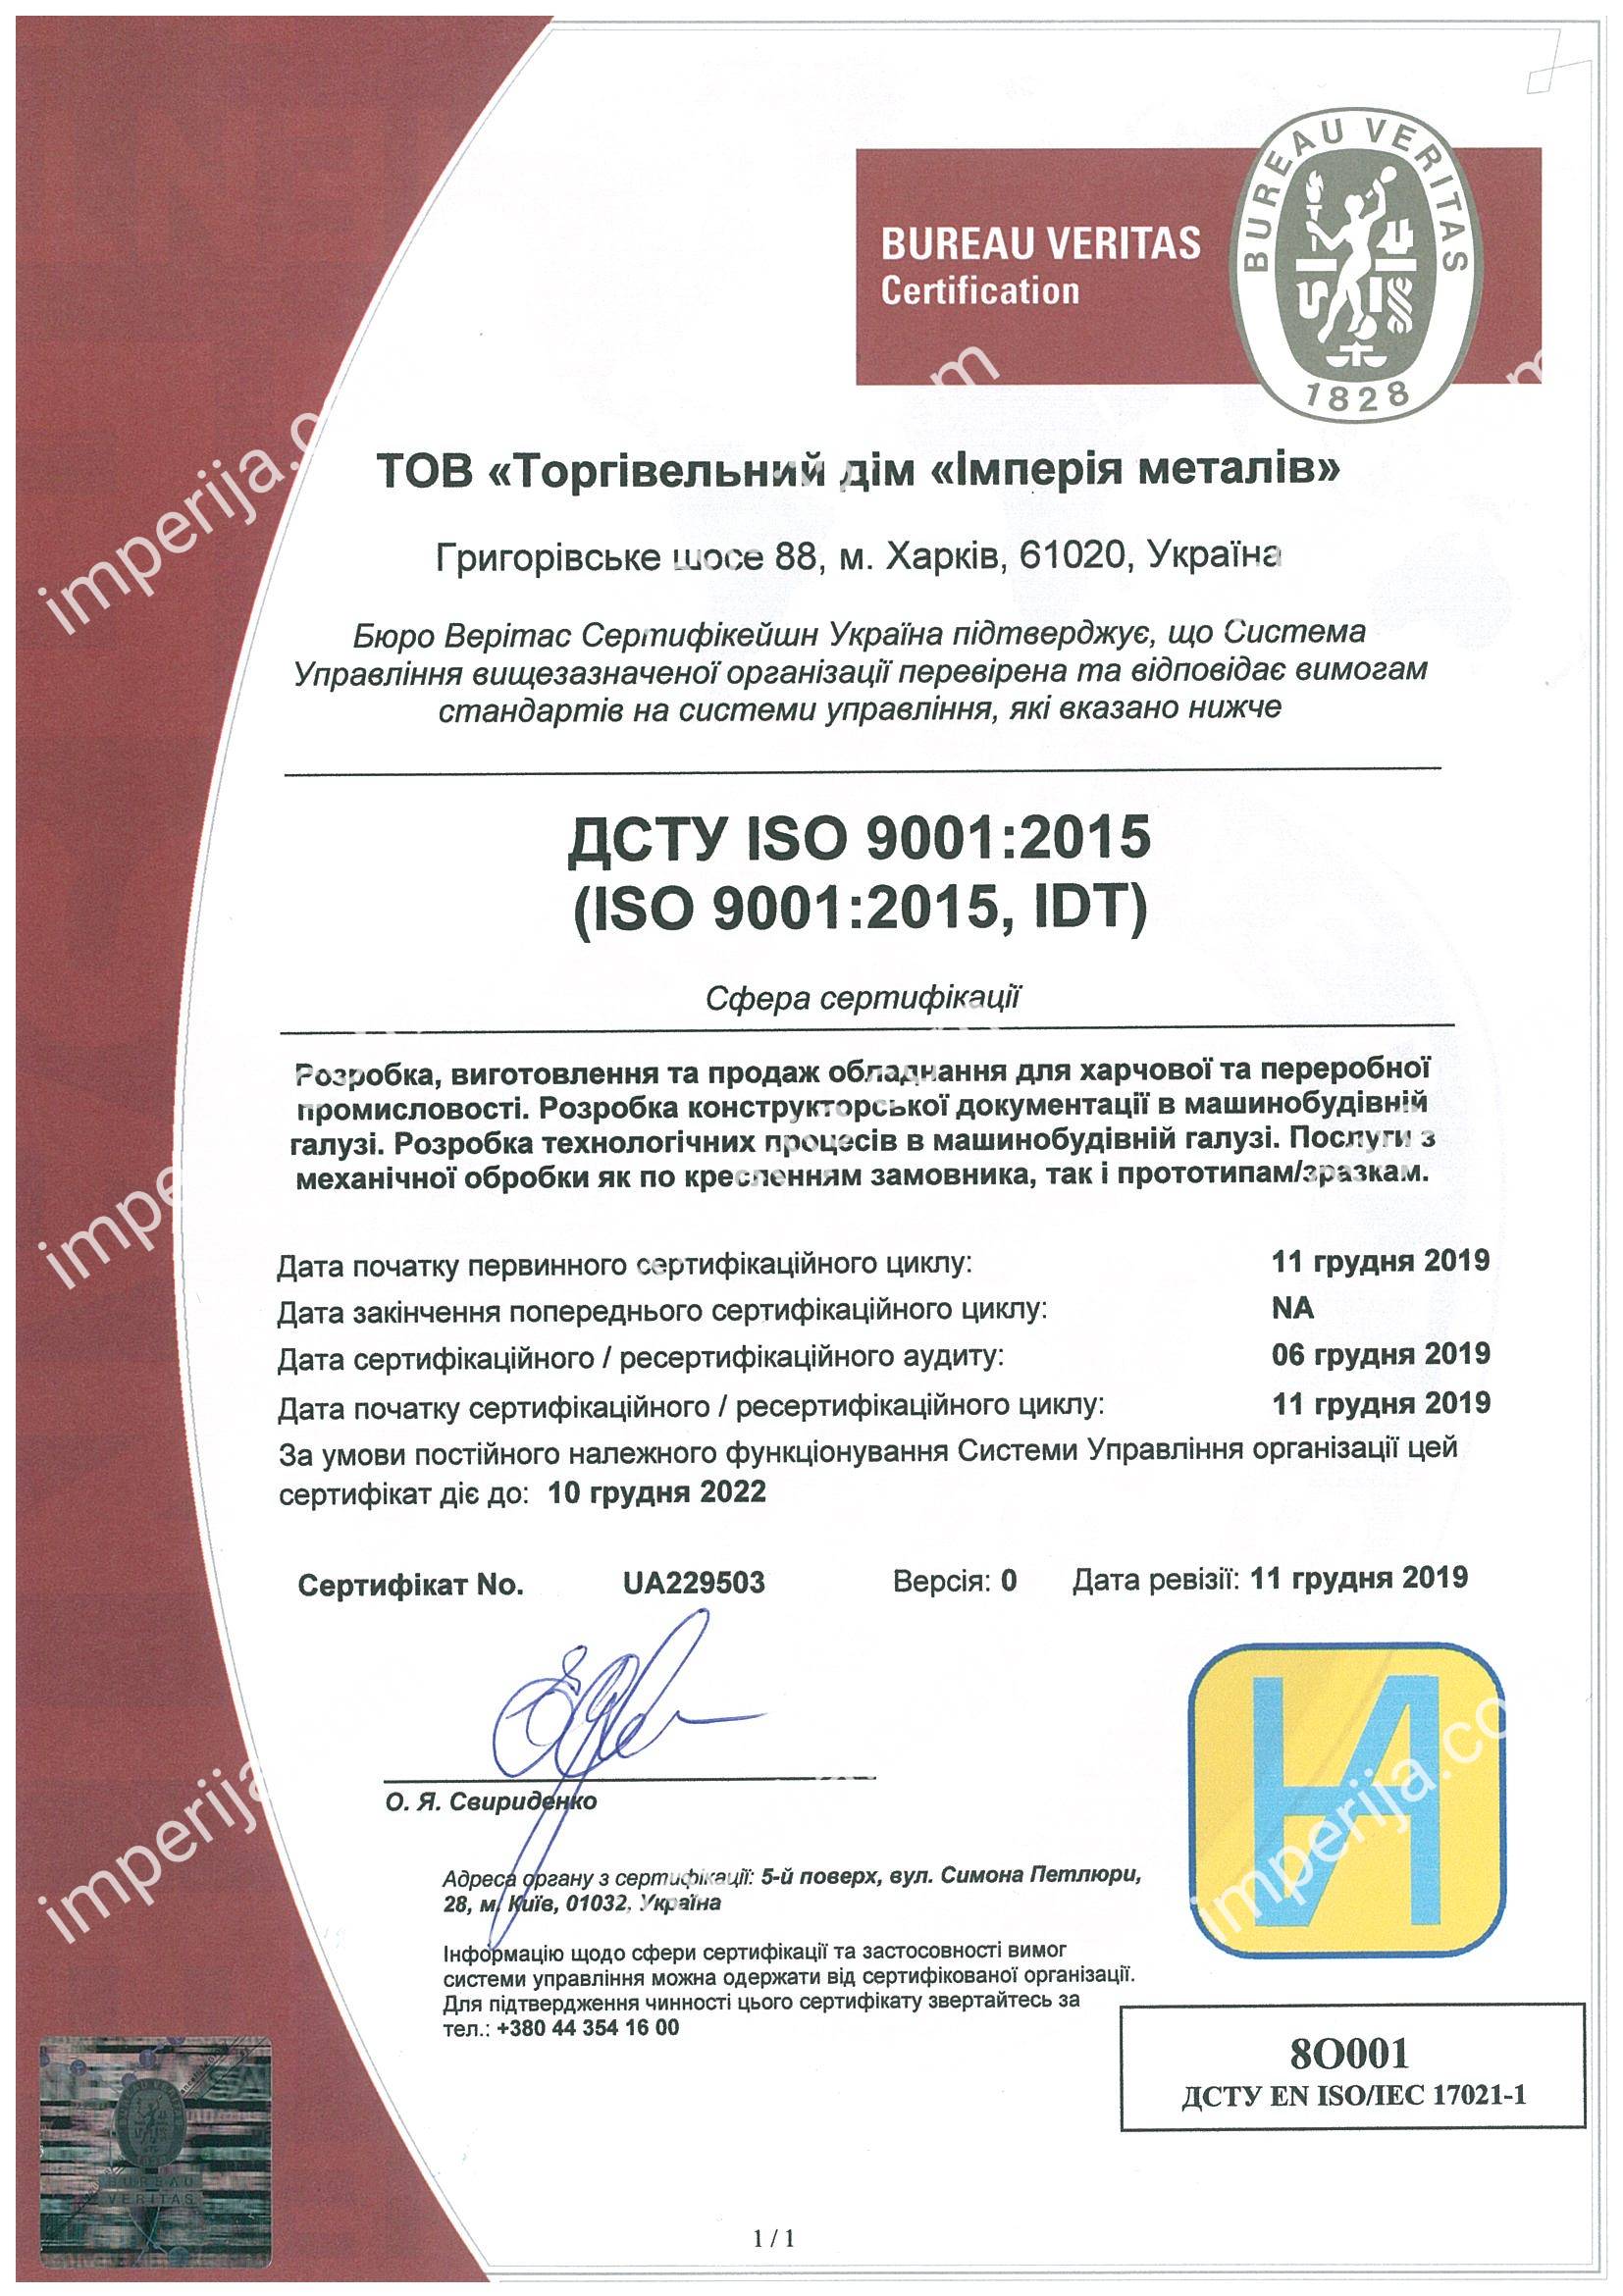 517.jpg - Certificate of Conformity obtained ISO 9001:2015